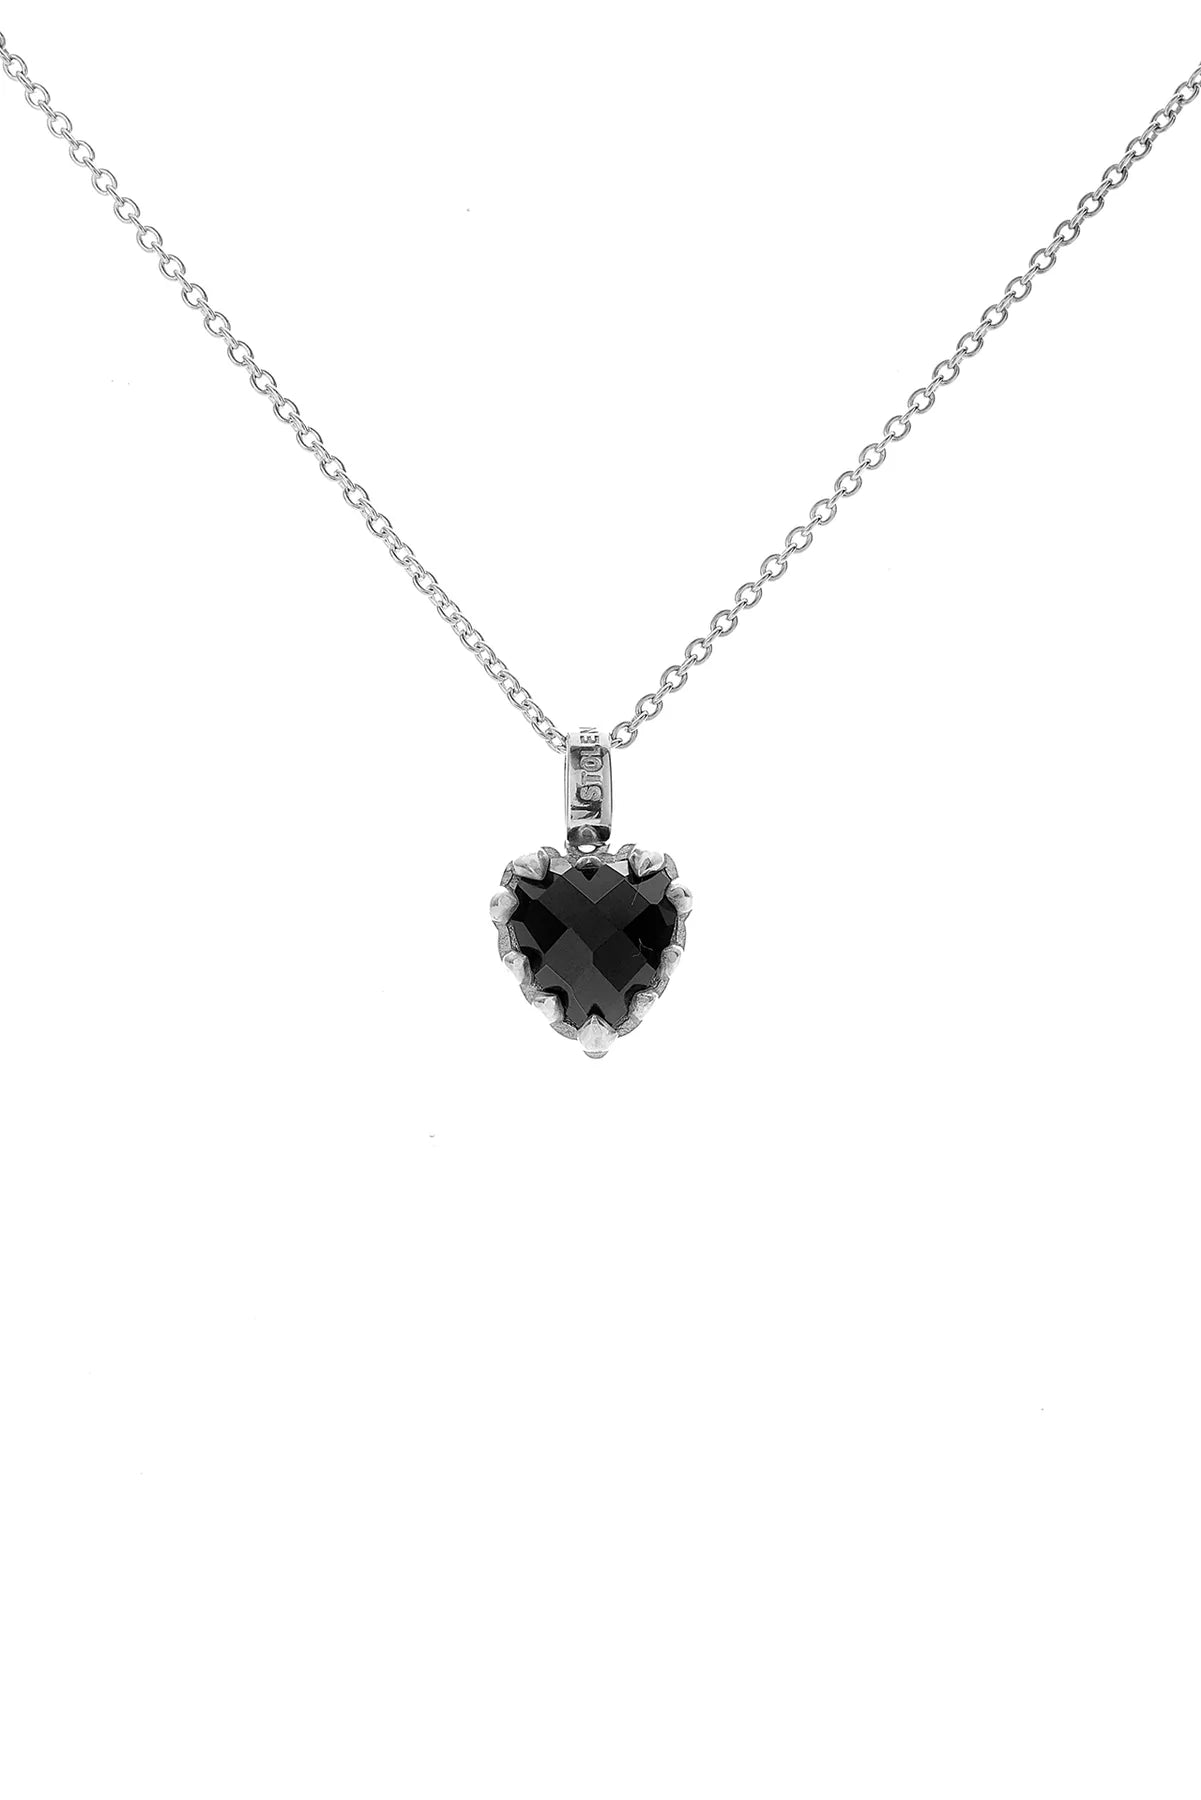 Stolen - Love Claw Necklace - Black Onyx